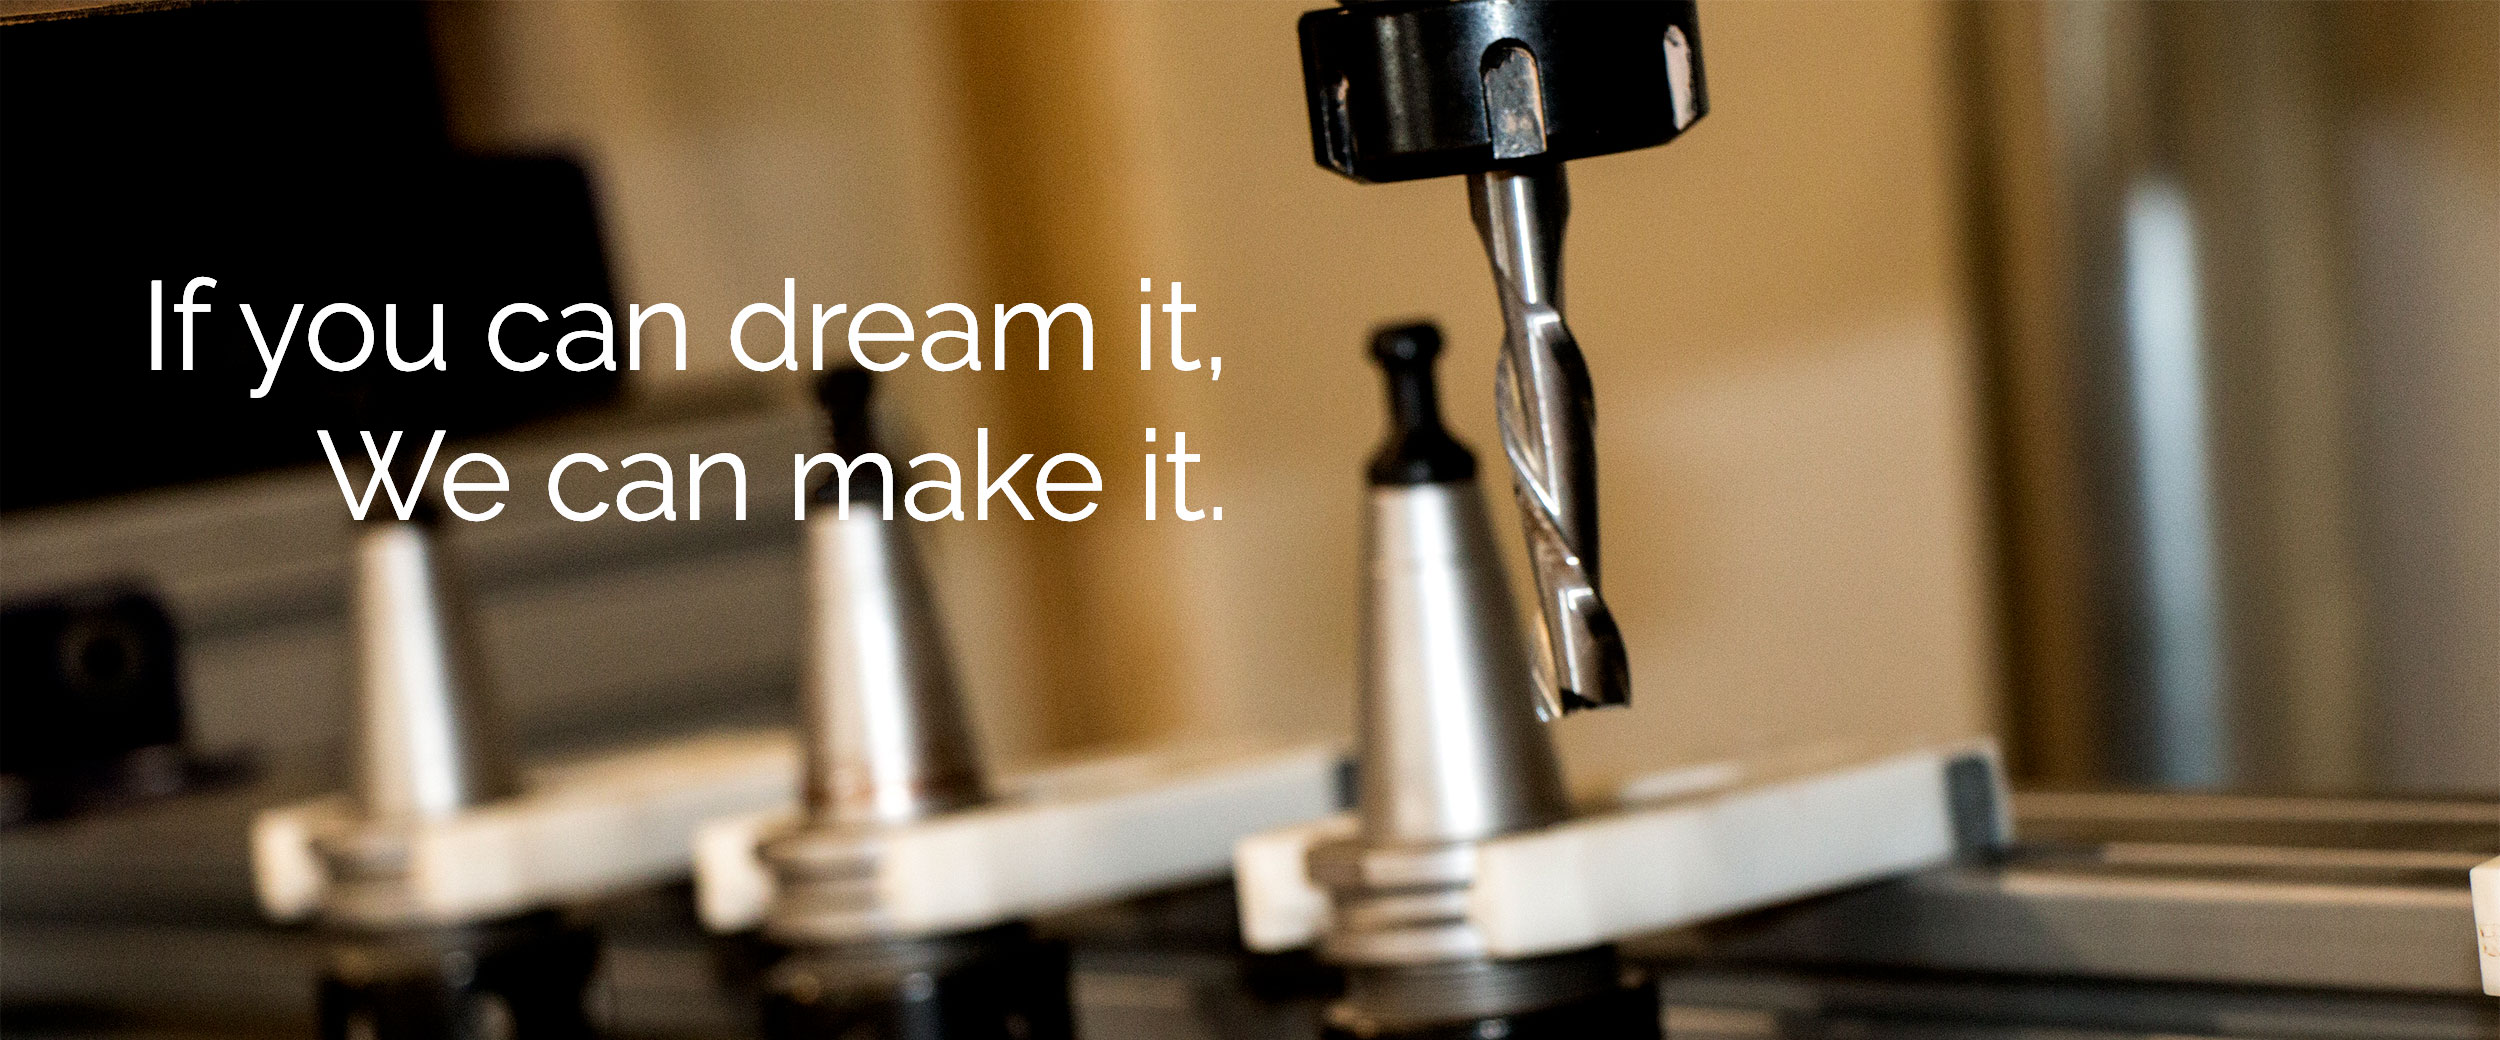 close up photo of drill bit on 3 axis cnc machine with the words "If you can dream it, we can make it." Written over it.